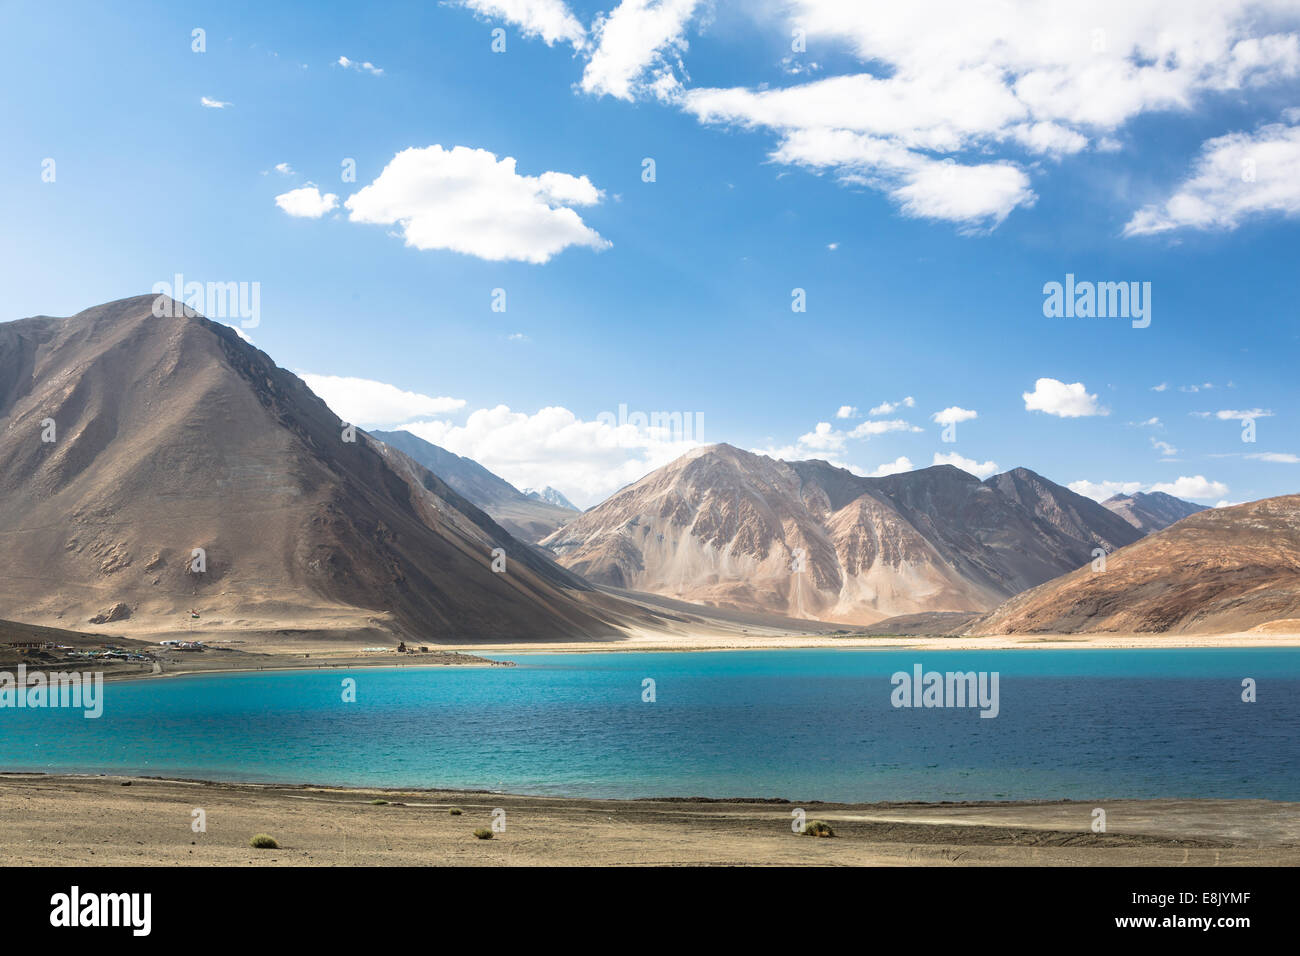 Stunning Pangong lake in Ladakh, India. The lake shares a border with Tibet in China. Stock Photo